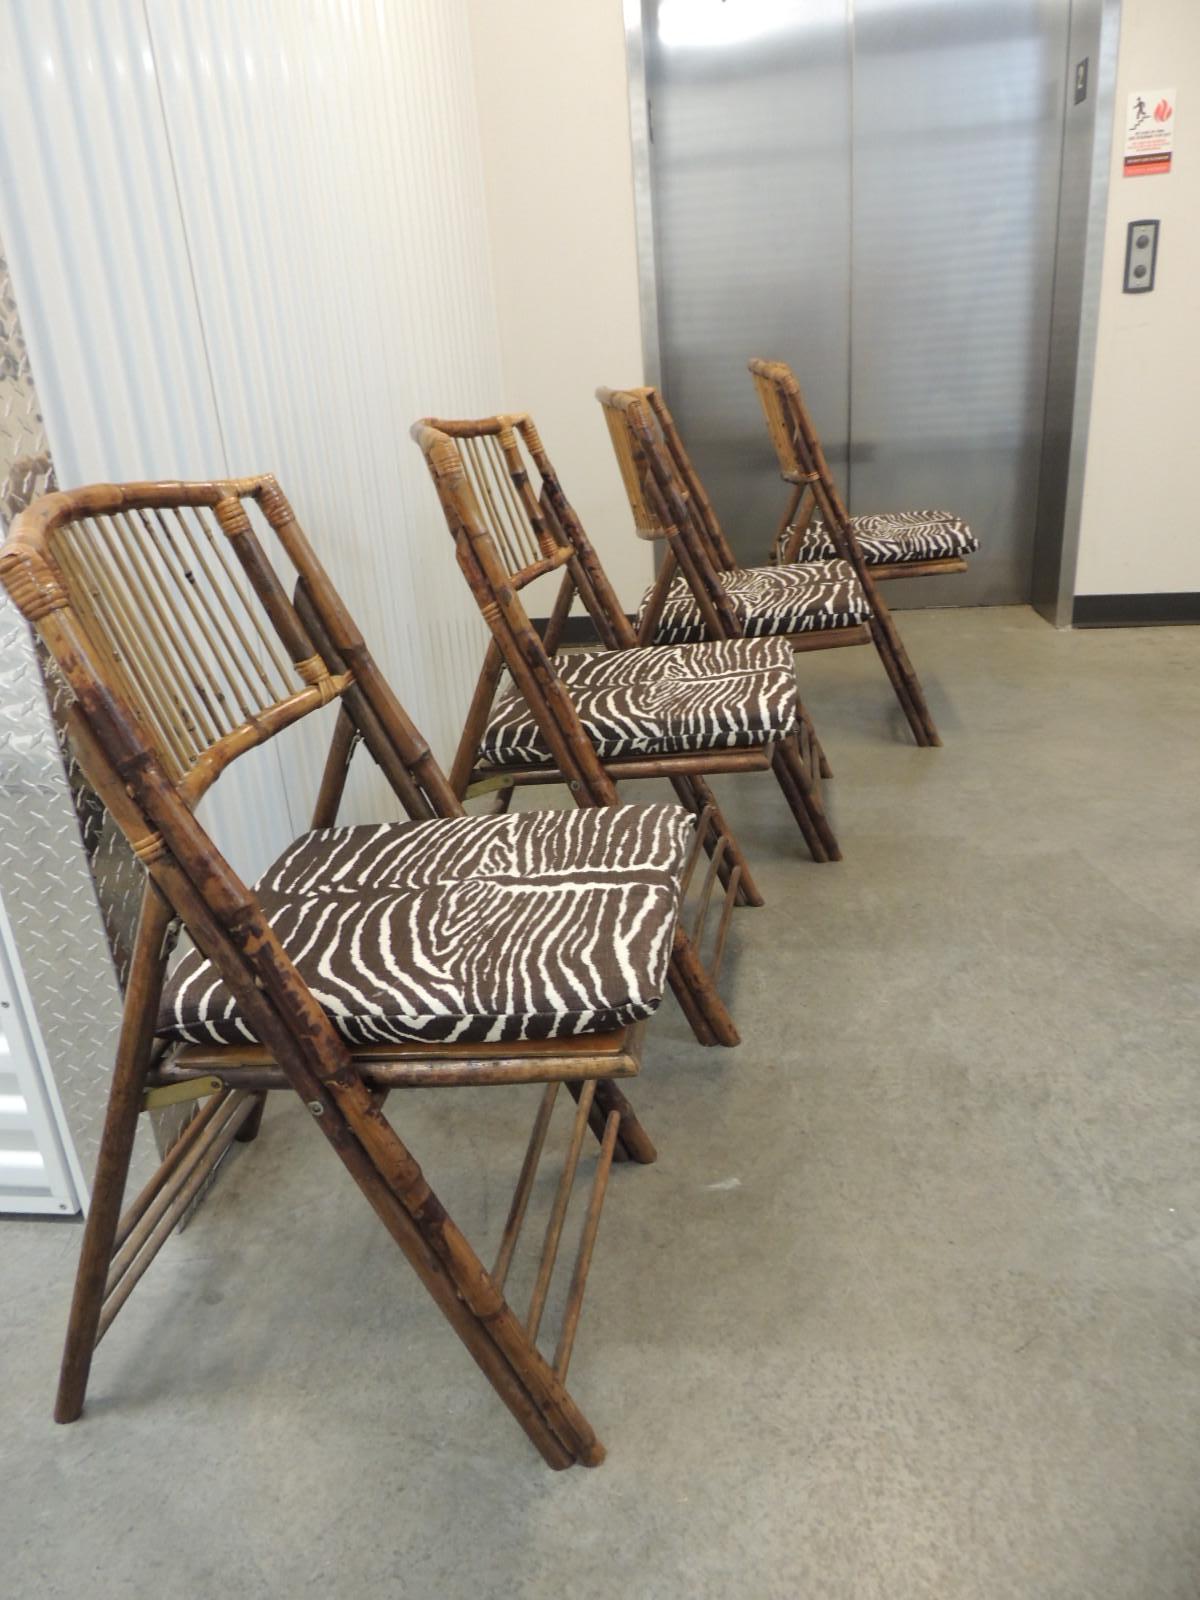 Set of (4) vintage tortoise bamboo and rattan folding chairs with seat cushions.
Bamboo set with Paolo Moschino For Nicholas Haslam for Lee Jofa
Fabric: Zebra in Brown and white (zipper closure seat cushions, double sided and foam filled.
Fabric: